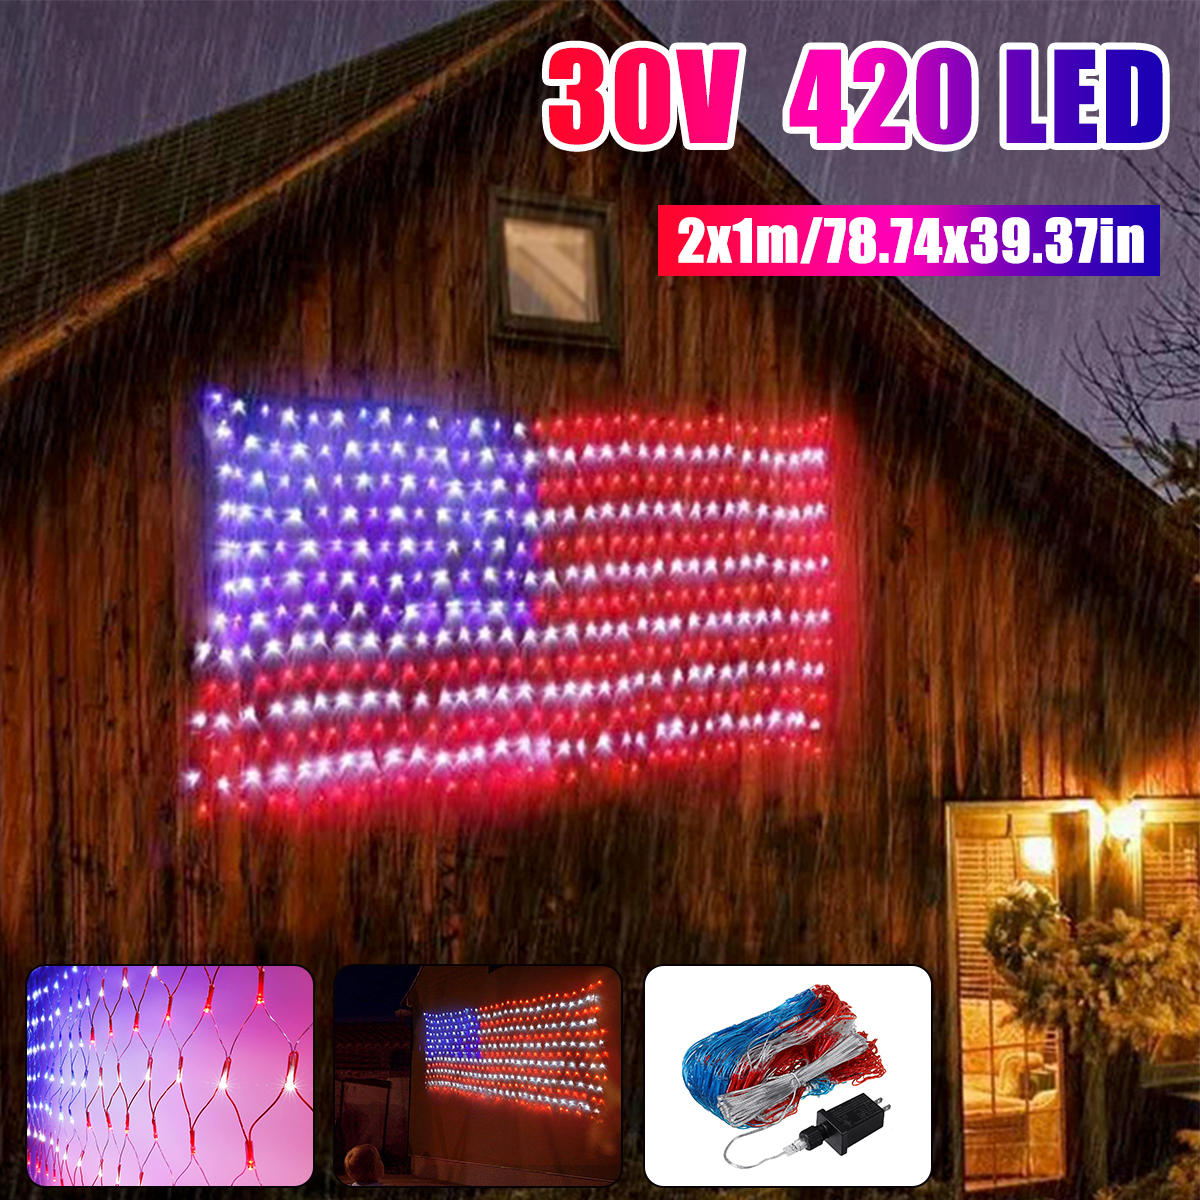 30V-420LEDs-American-Flag-Net-Lamp-Outdoor-Waterproof-String-Light-Yard-Home-Holiday-Decoration-US-P-1732818-1